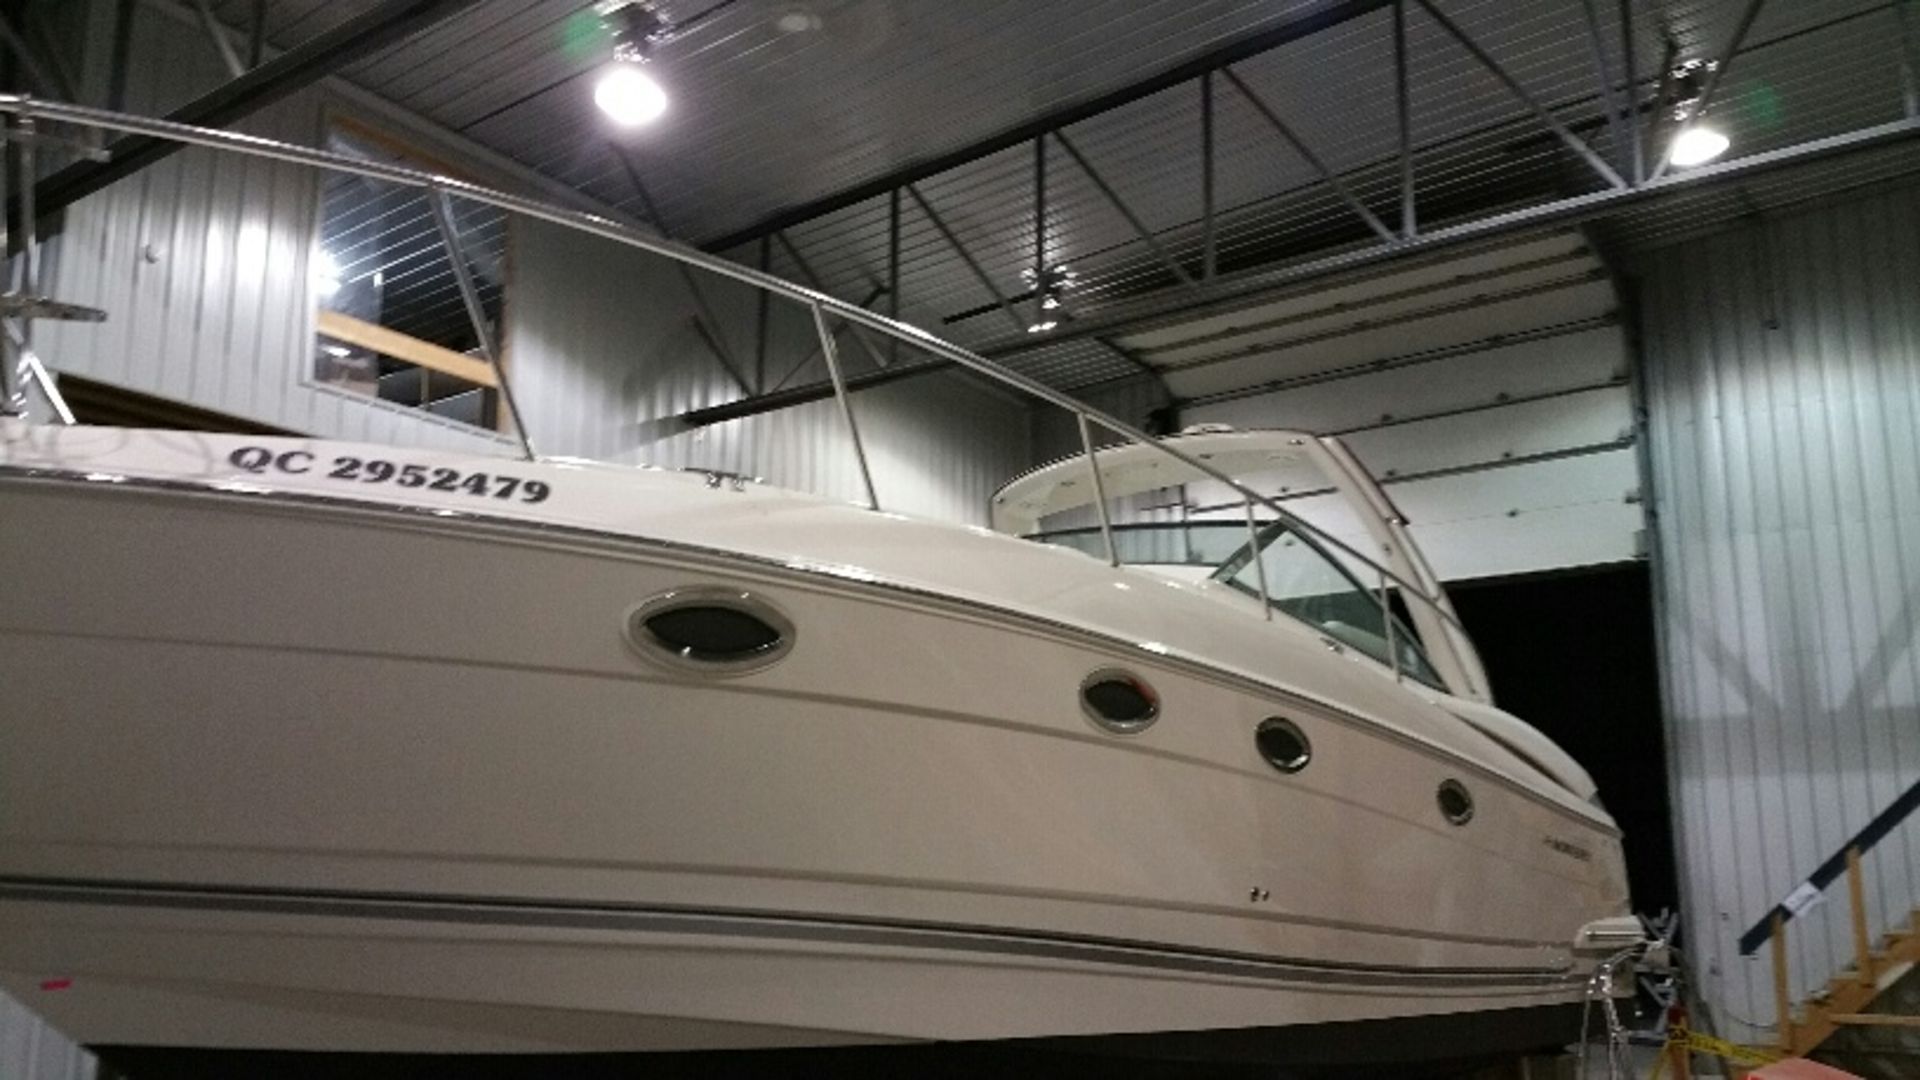 MONTERAY (2006) 350 SPORT LUXURY SPORTS YACHT WITHÂ  35â€™ LOA, 11.6â€™ BEAM, 10â€™ OVERALL HEIGHT , - Image 16 of 31